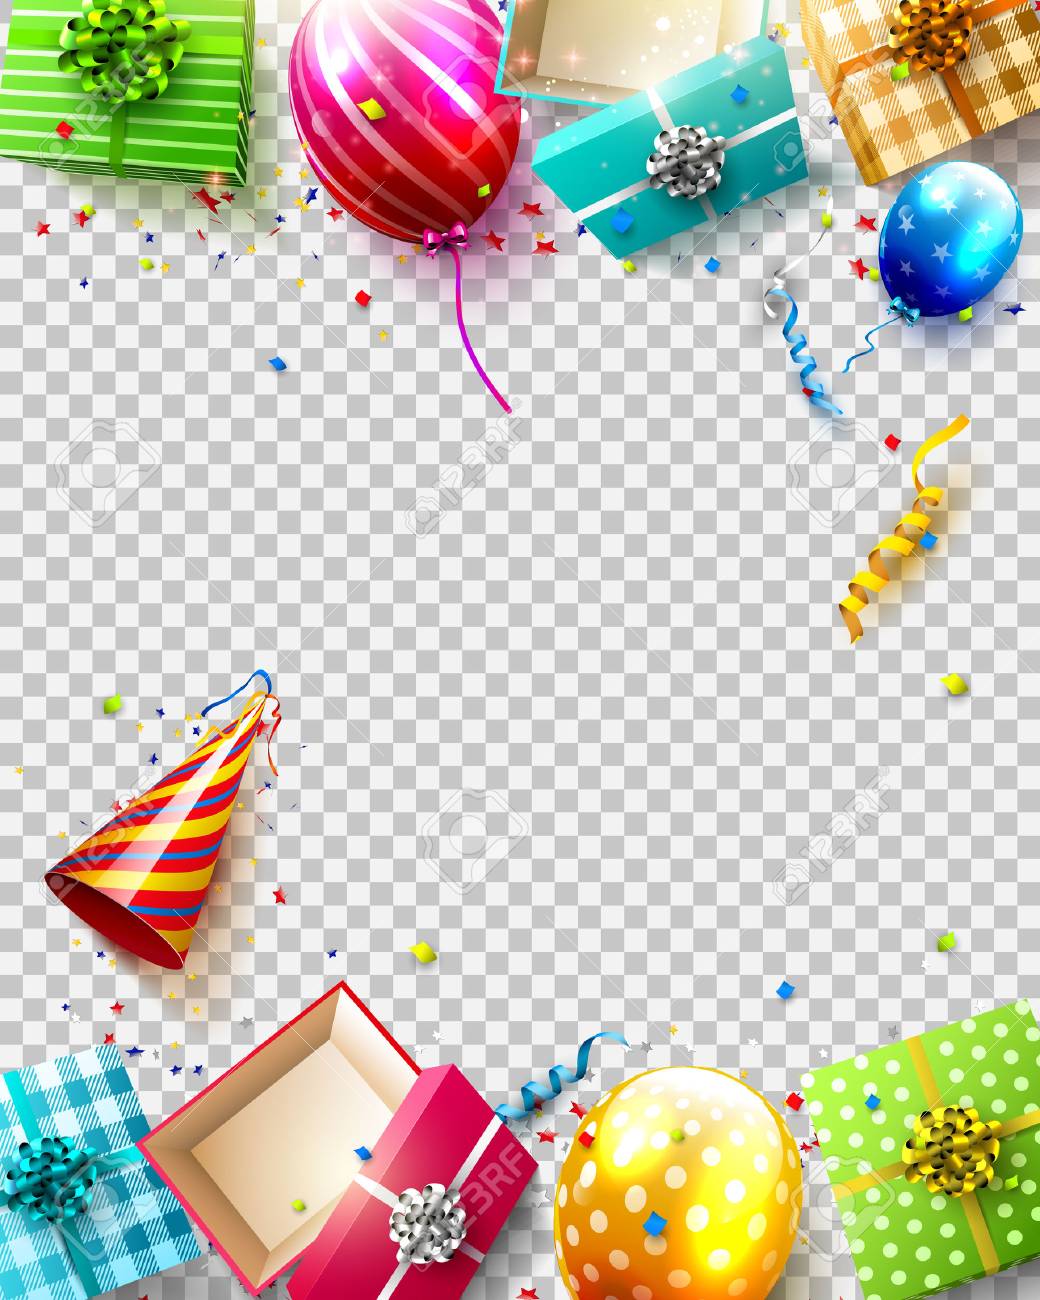 BirtHDay Balloons Gifts And Confetti On Transparent Background